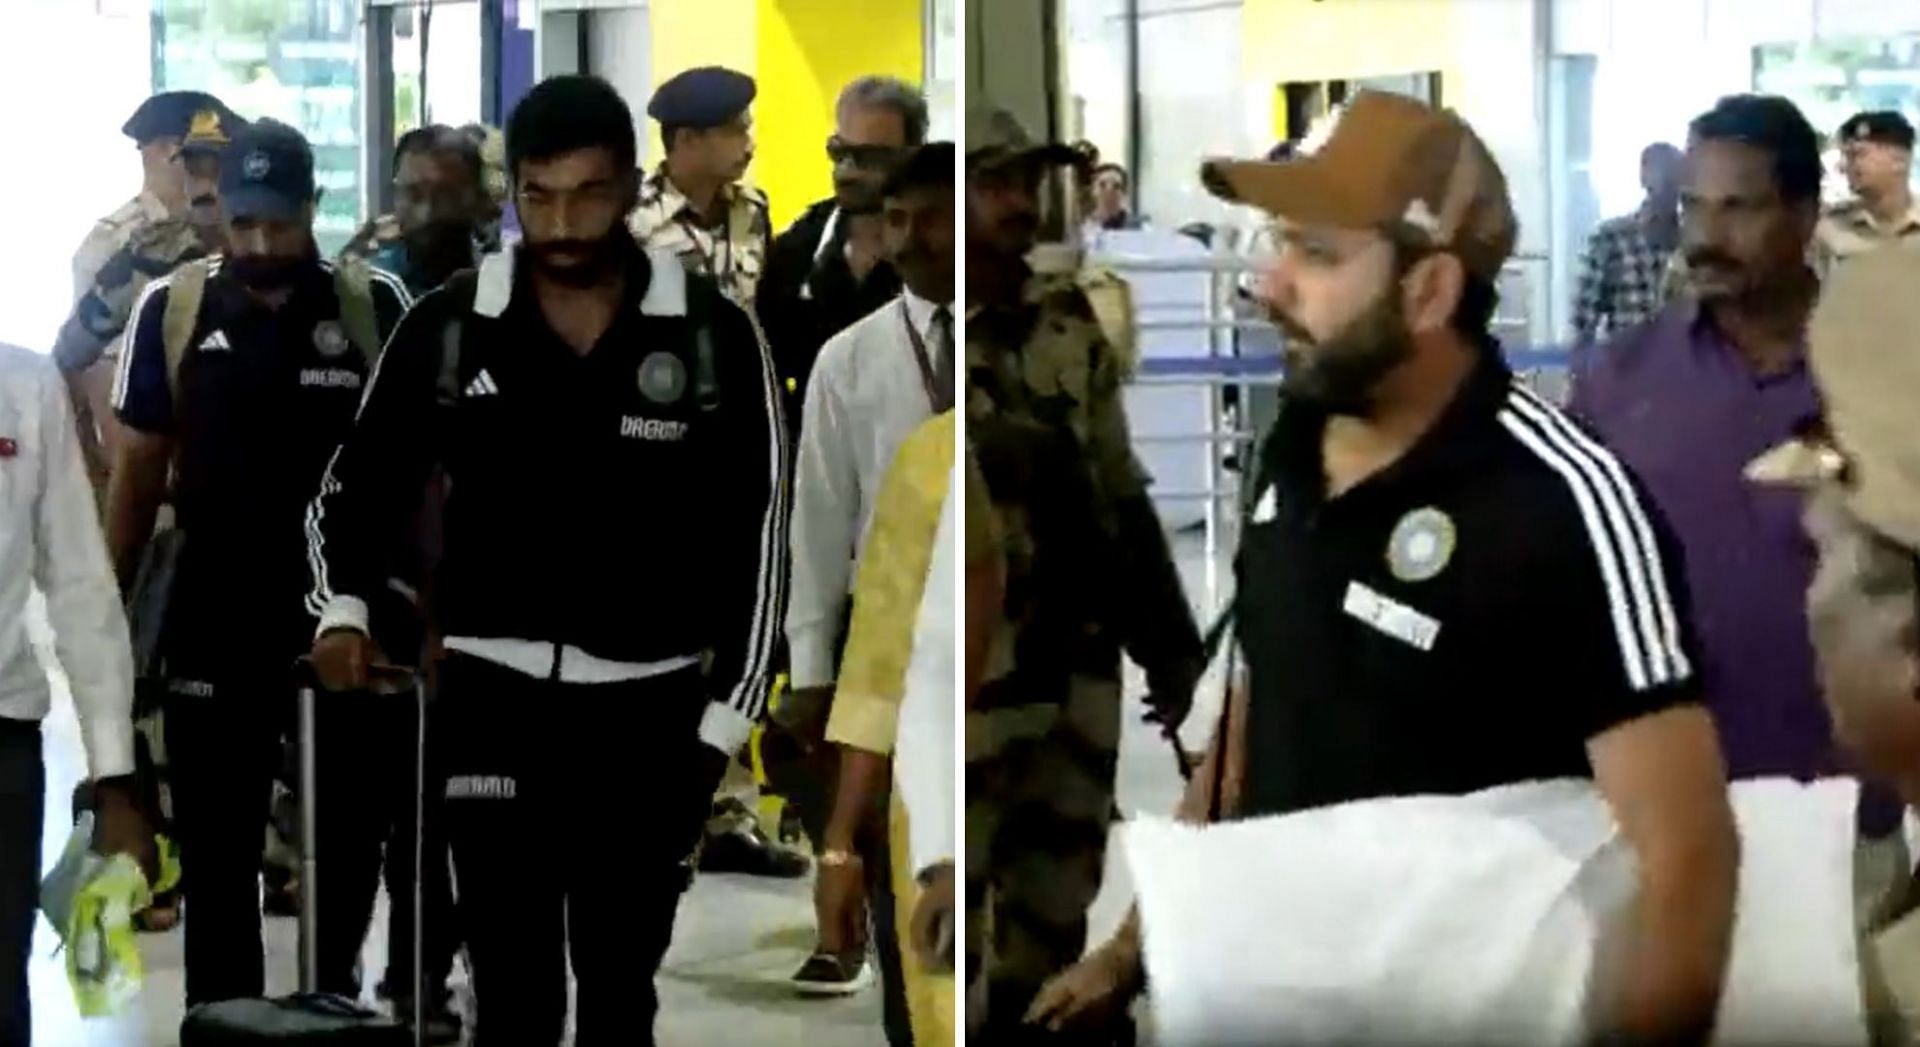 [Watch] Team India arrive in Thiruvananthapuram ahead of second World Cup warmup game against the Netherlands